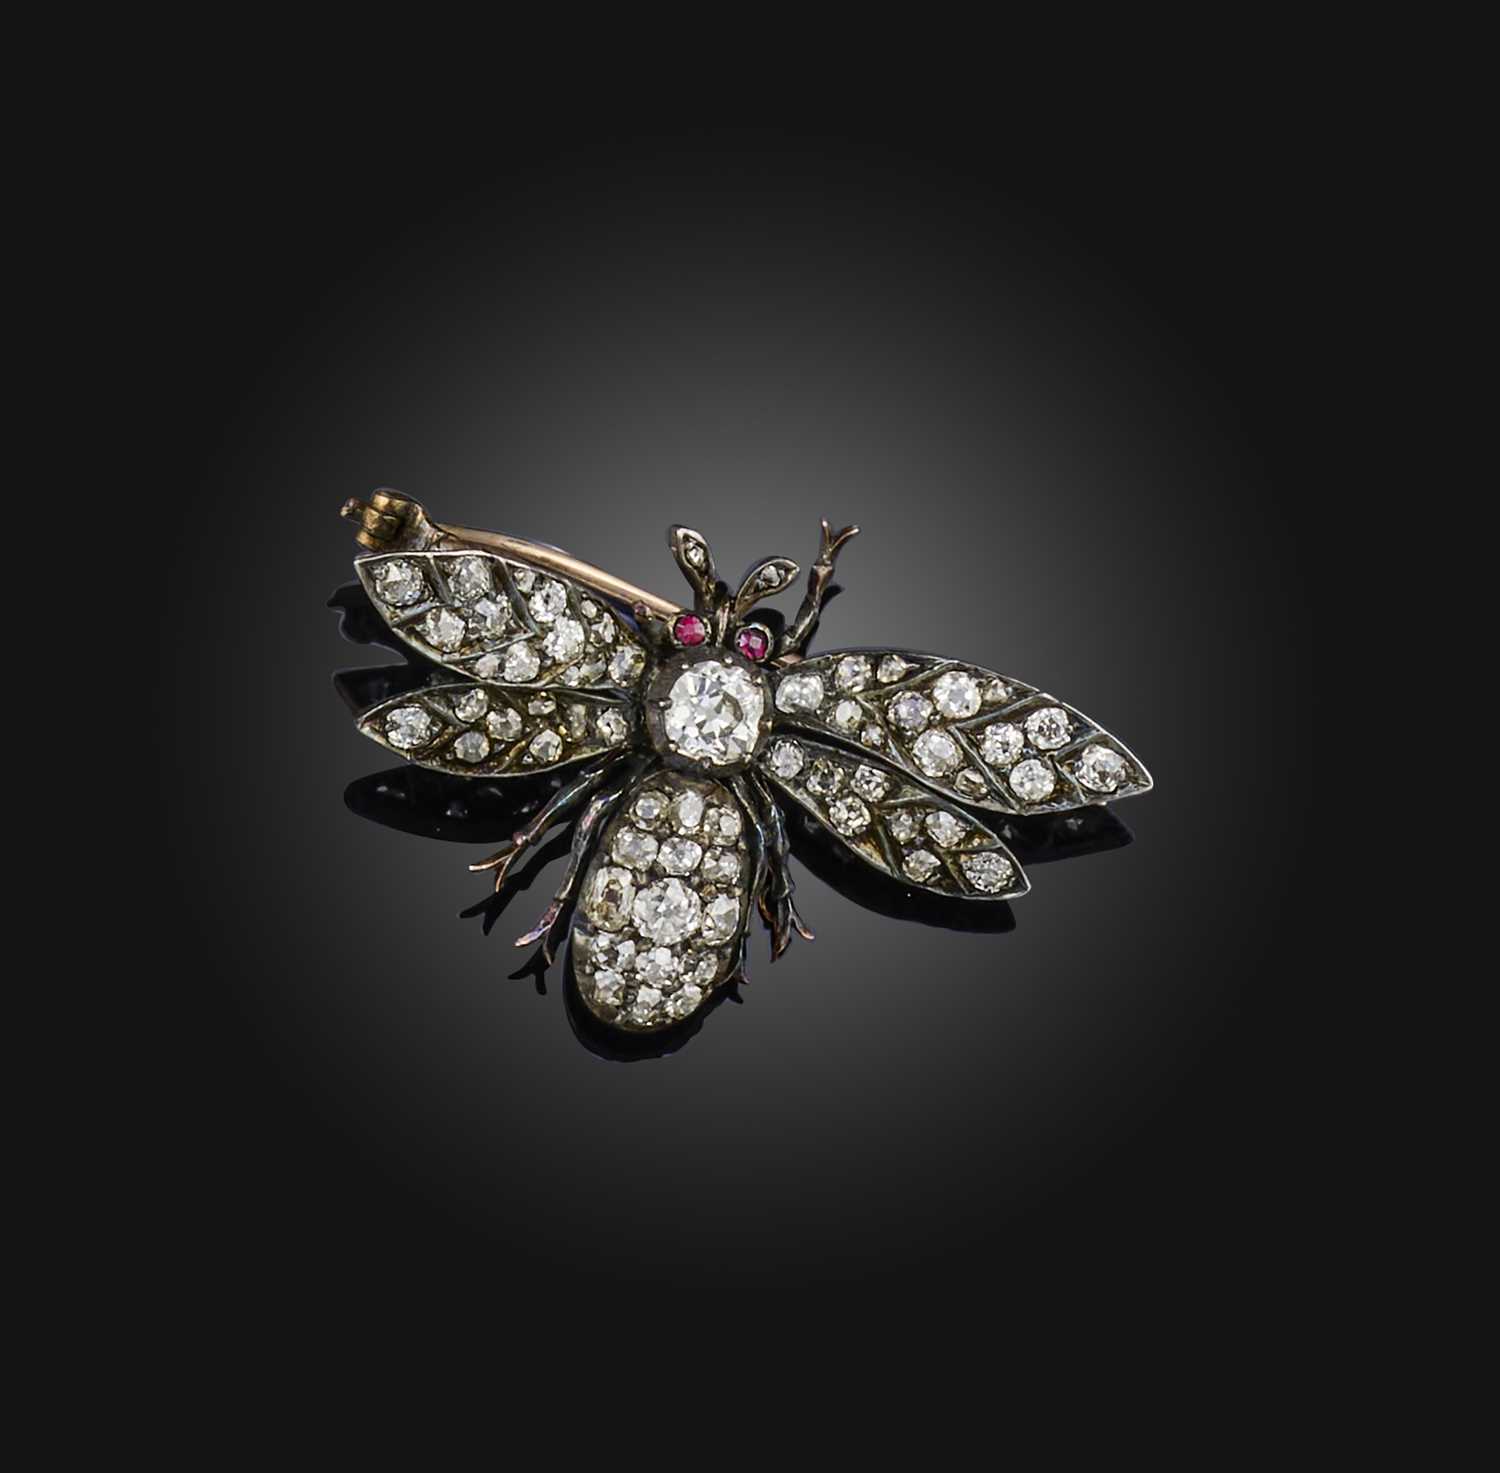 A Victorian diamond and ruby brooch, late 19th century, designed as a bee, set with cushion-shaped